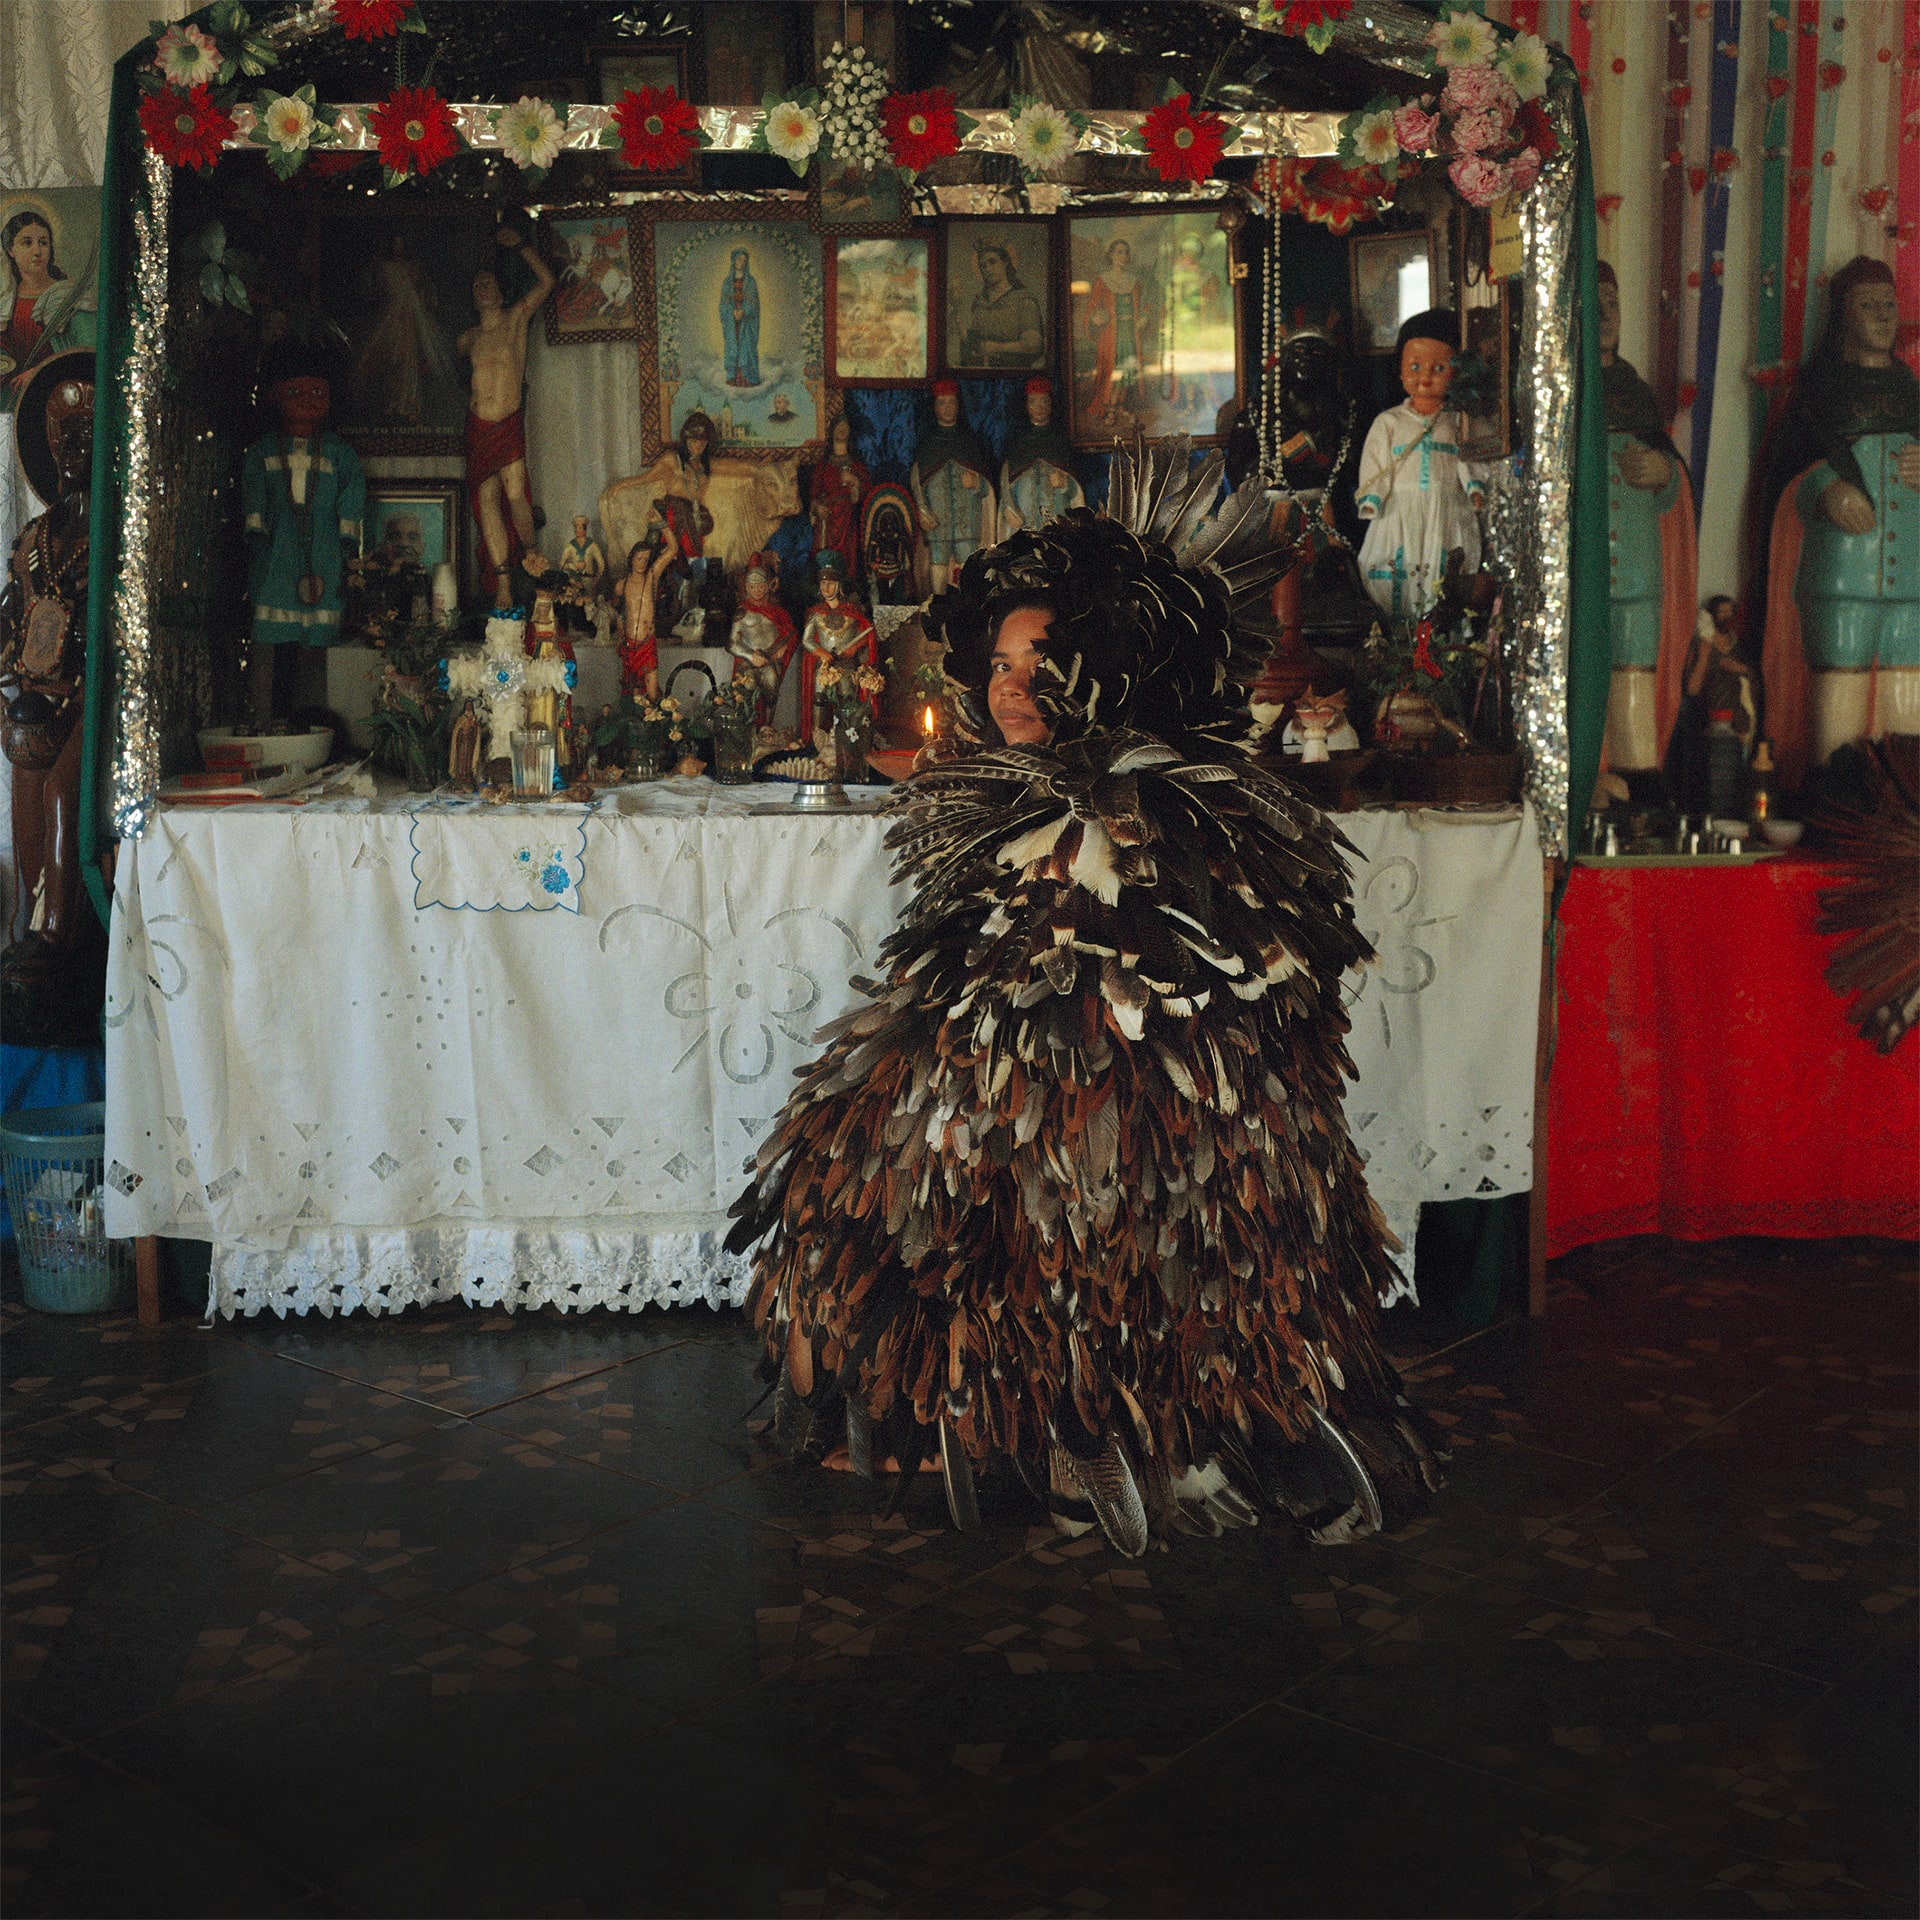 Photograph featuring a person completely dressed in feathers, crouching in front of a table decorated with model figures and paintings, turning their head to face the camera.